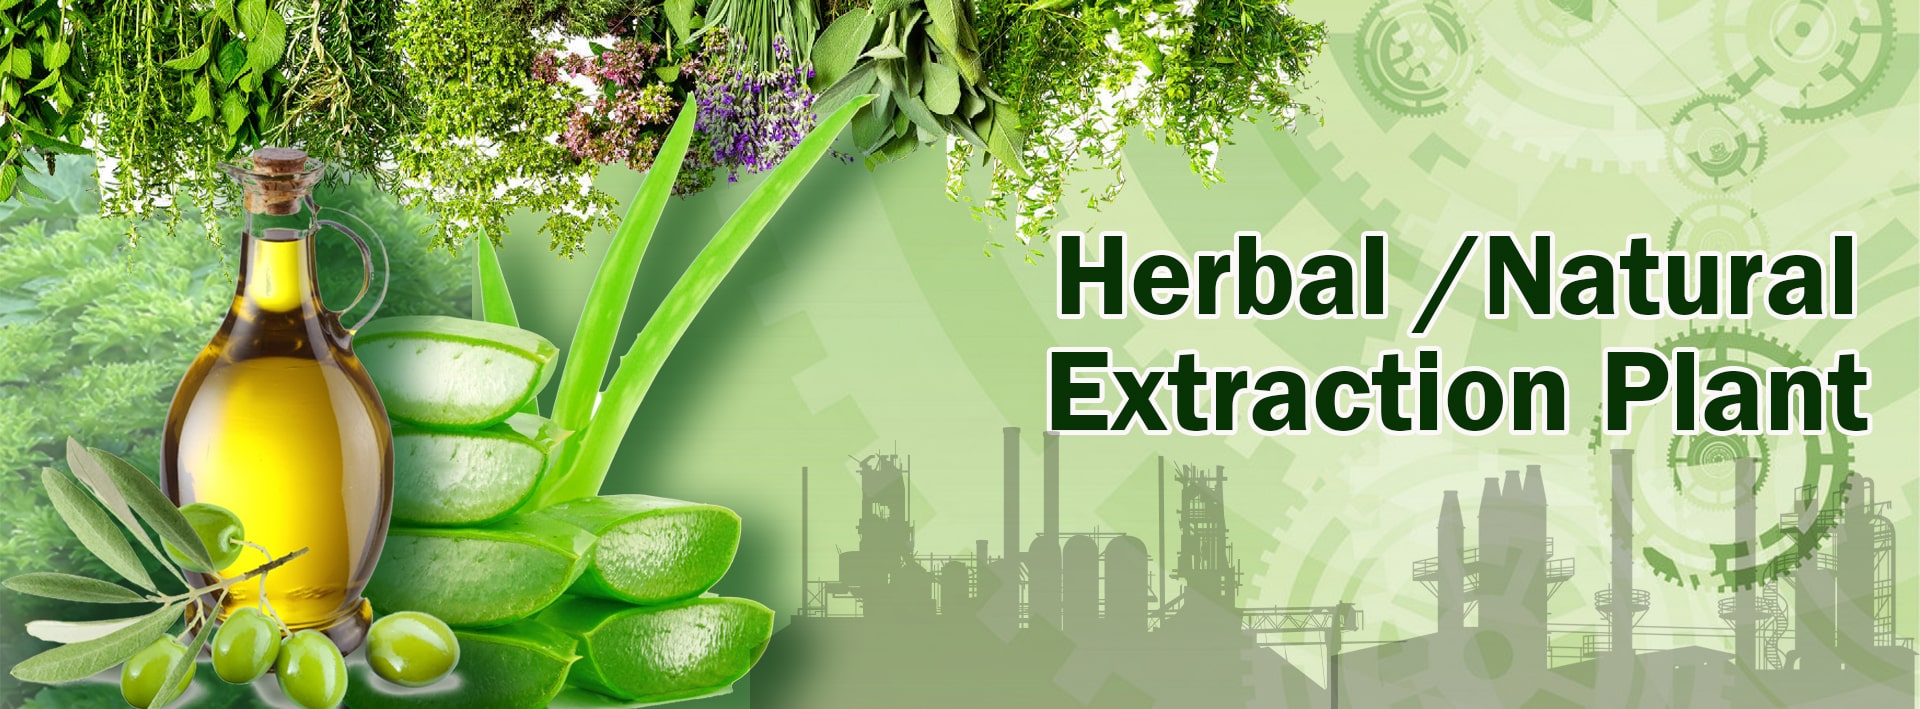 Natural extracts. Хербал натурал Плант. Plant extract. Berclean natural Plant extract. Okeny's Plant extracts.